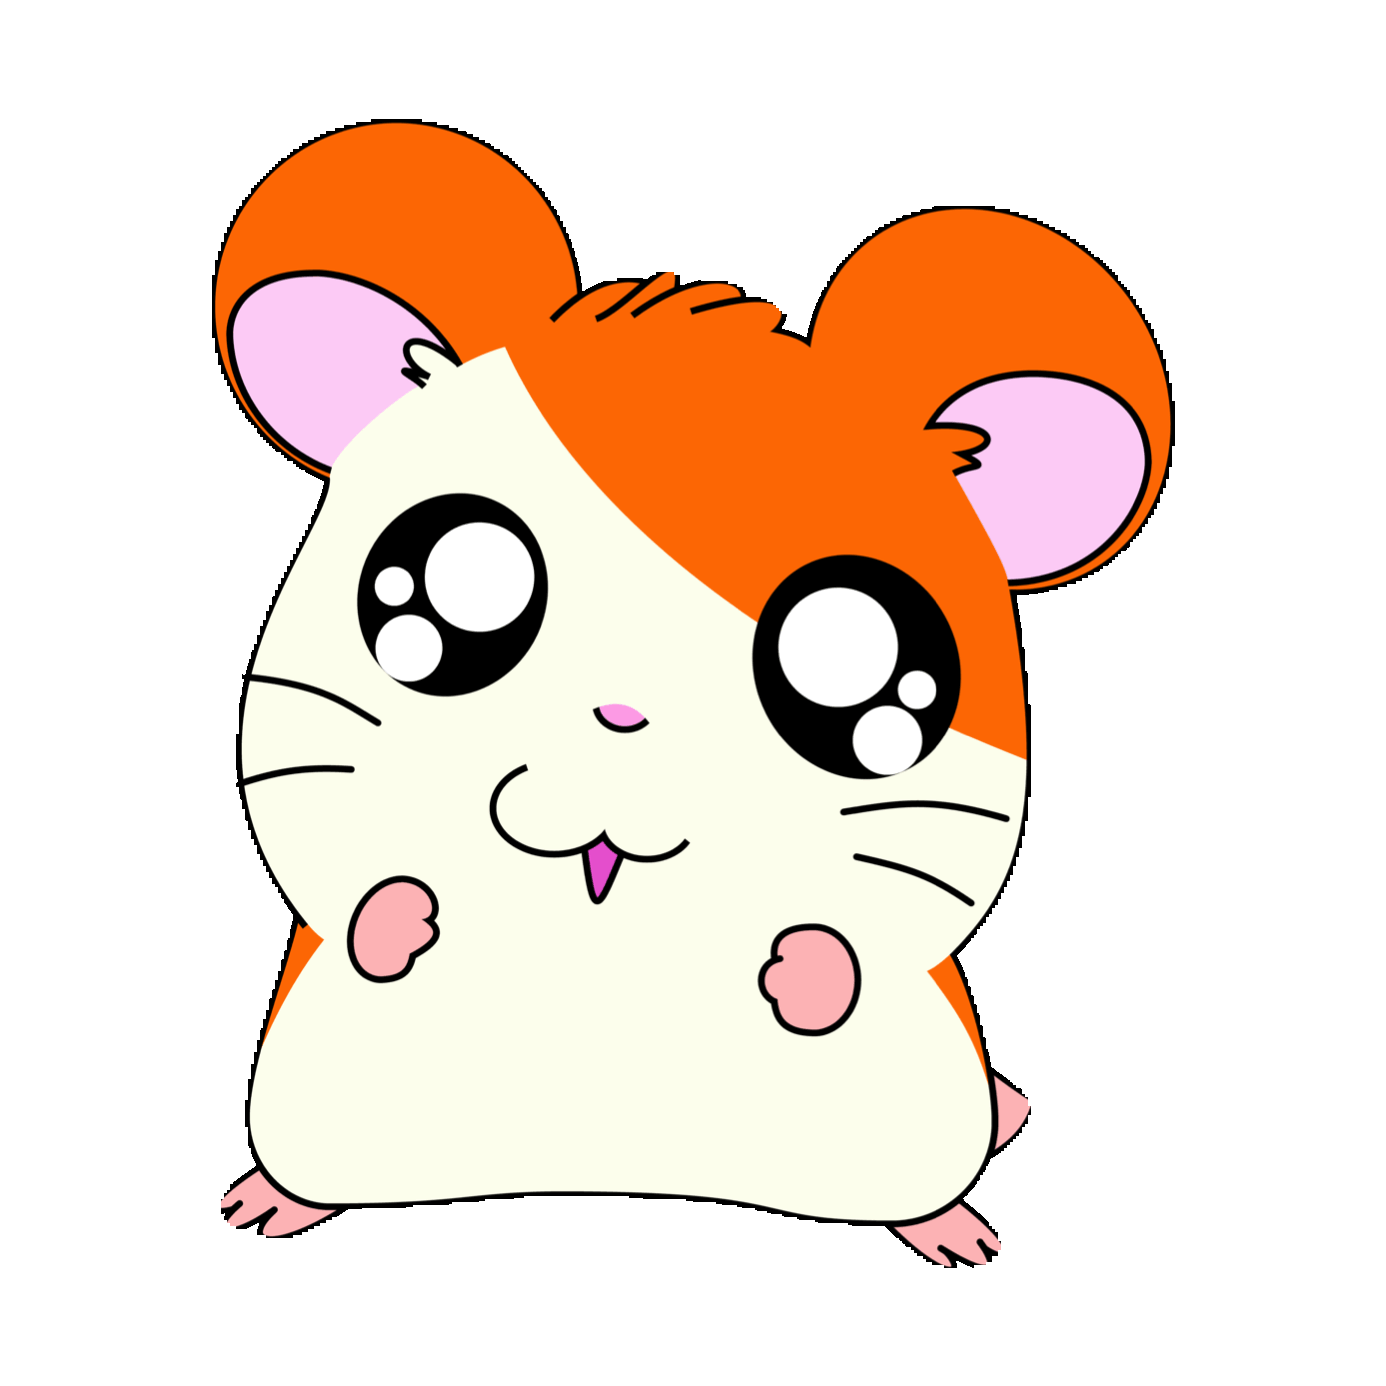 Sticker by imoji for. Hamster clipart line